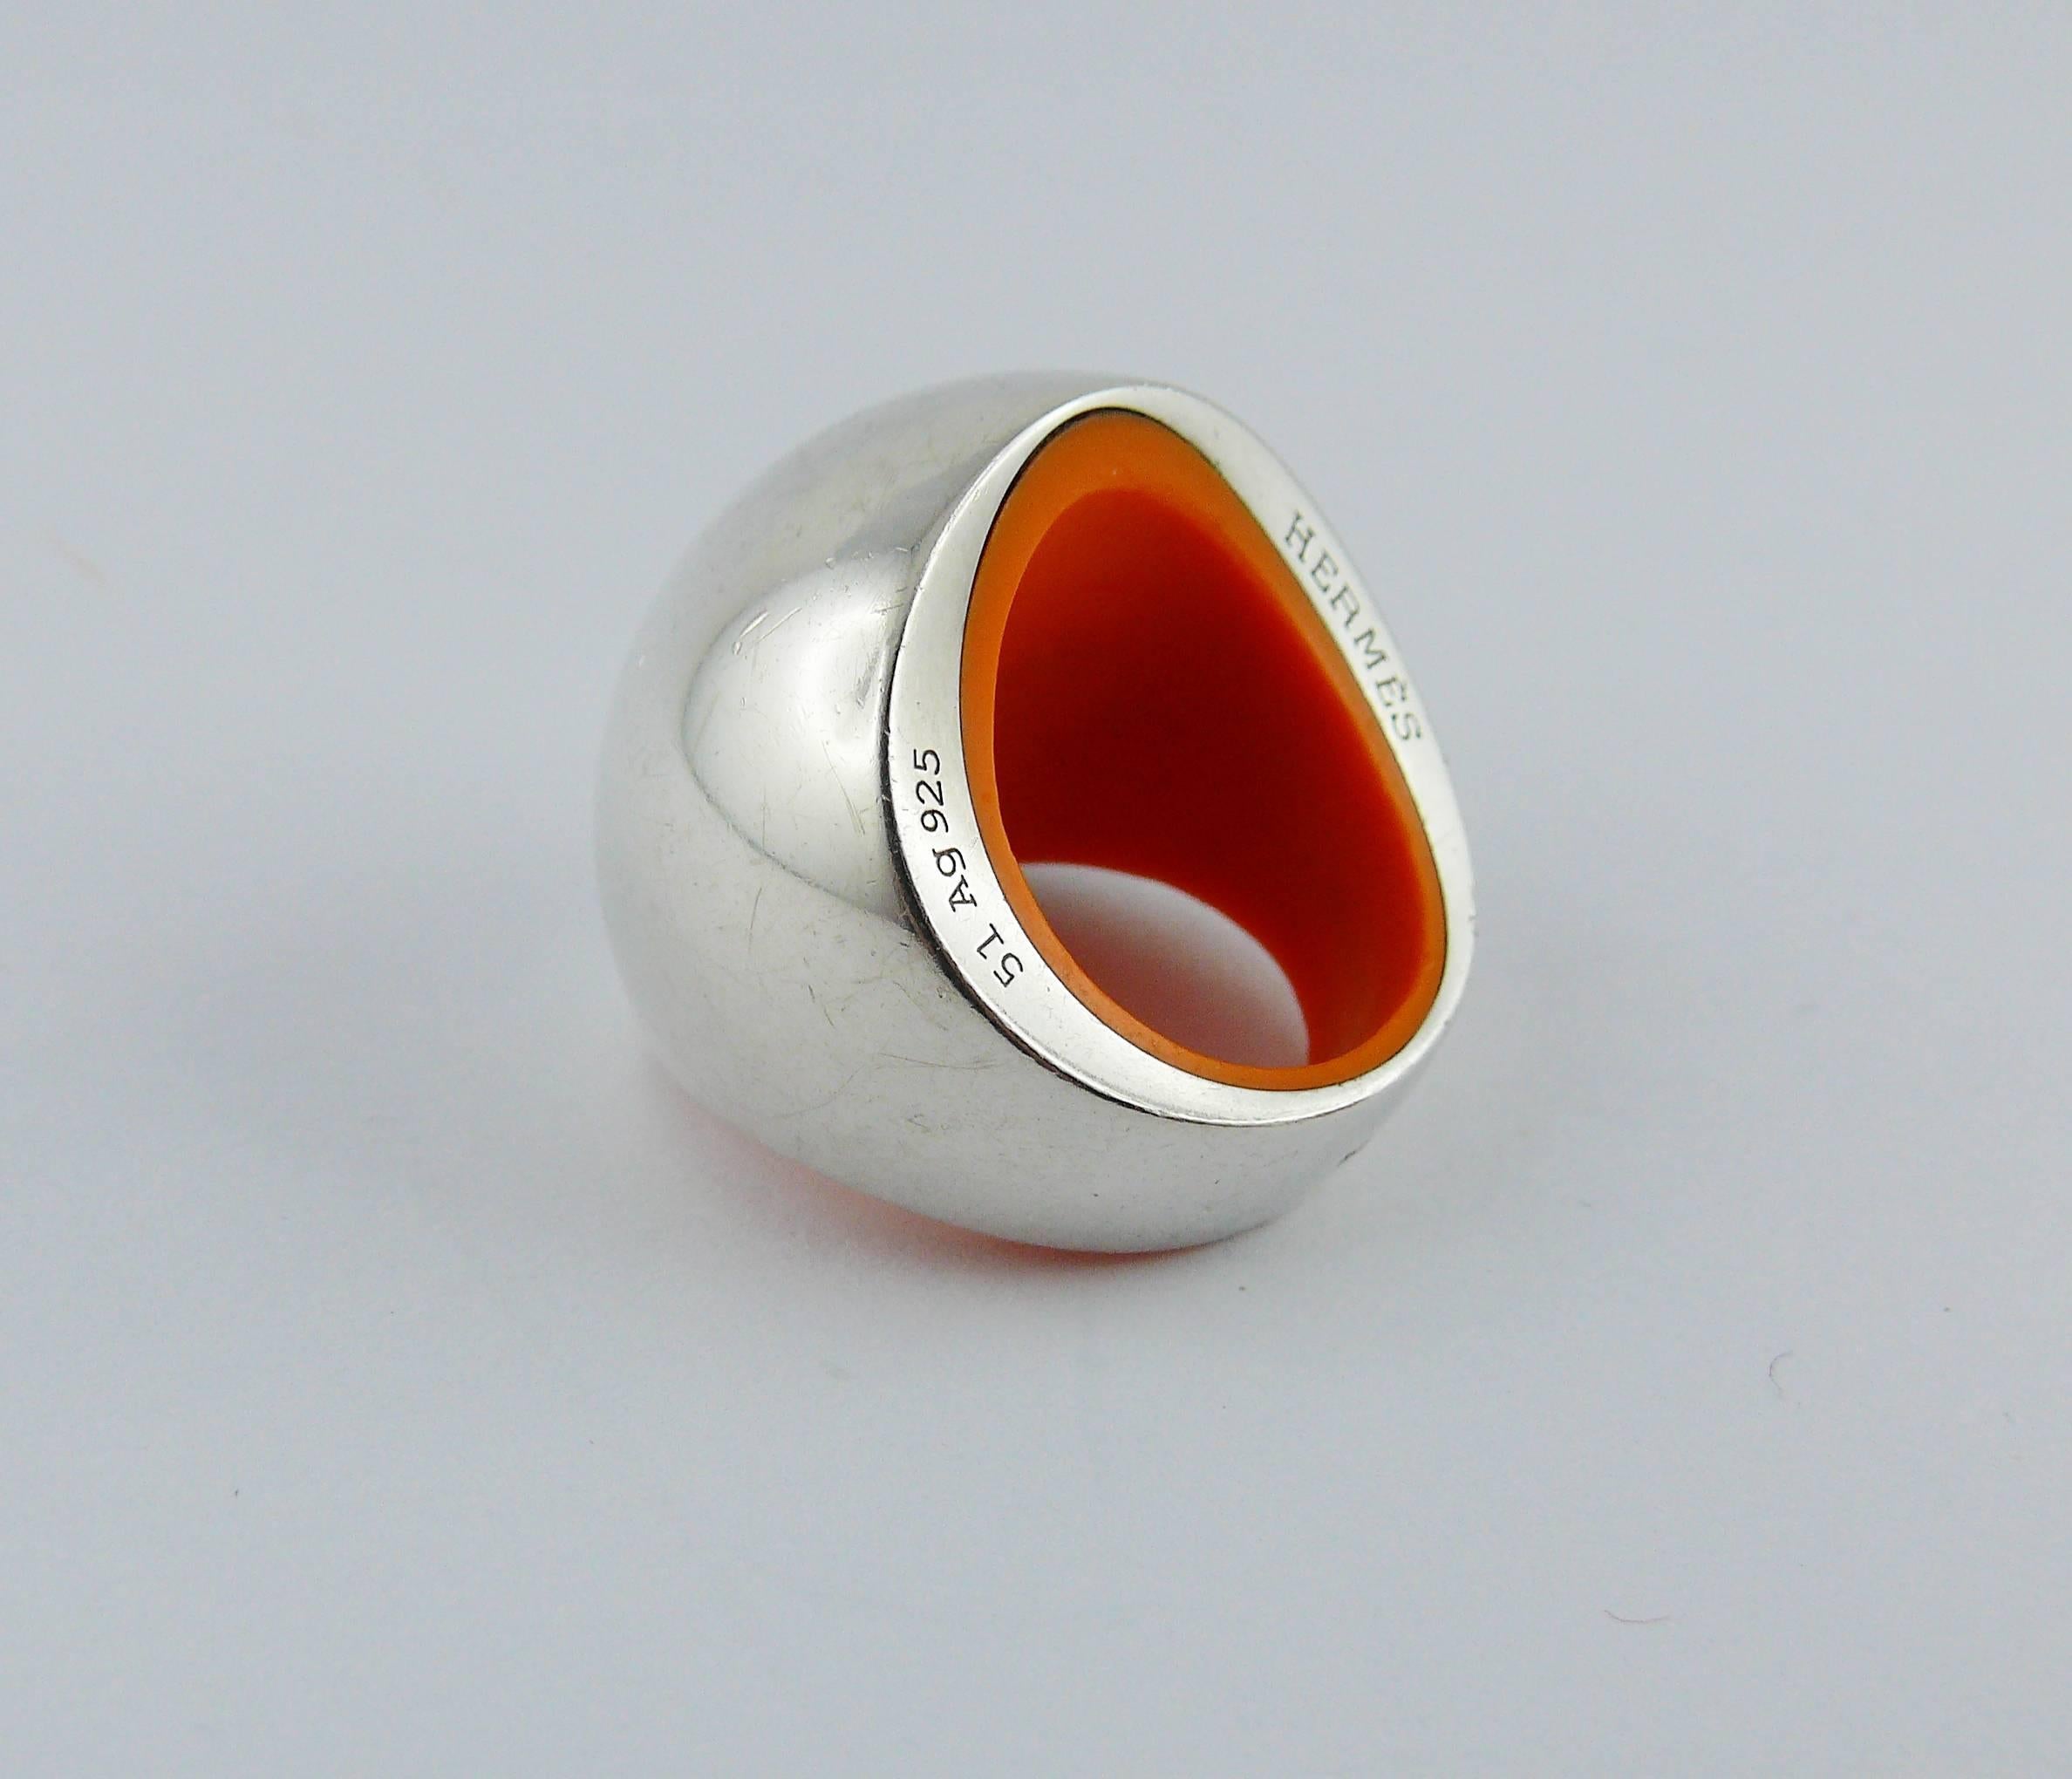 HERMES sterling silver Quark ring featuring a dome motif with an orange resin insert.

Embossed HERMES 51 Ag925.
Embossed A.D.

Indicative measurements : circumference approx. 5.09 cm (2 inches).

Comes with original box.

NOTES
- This is a preloved